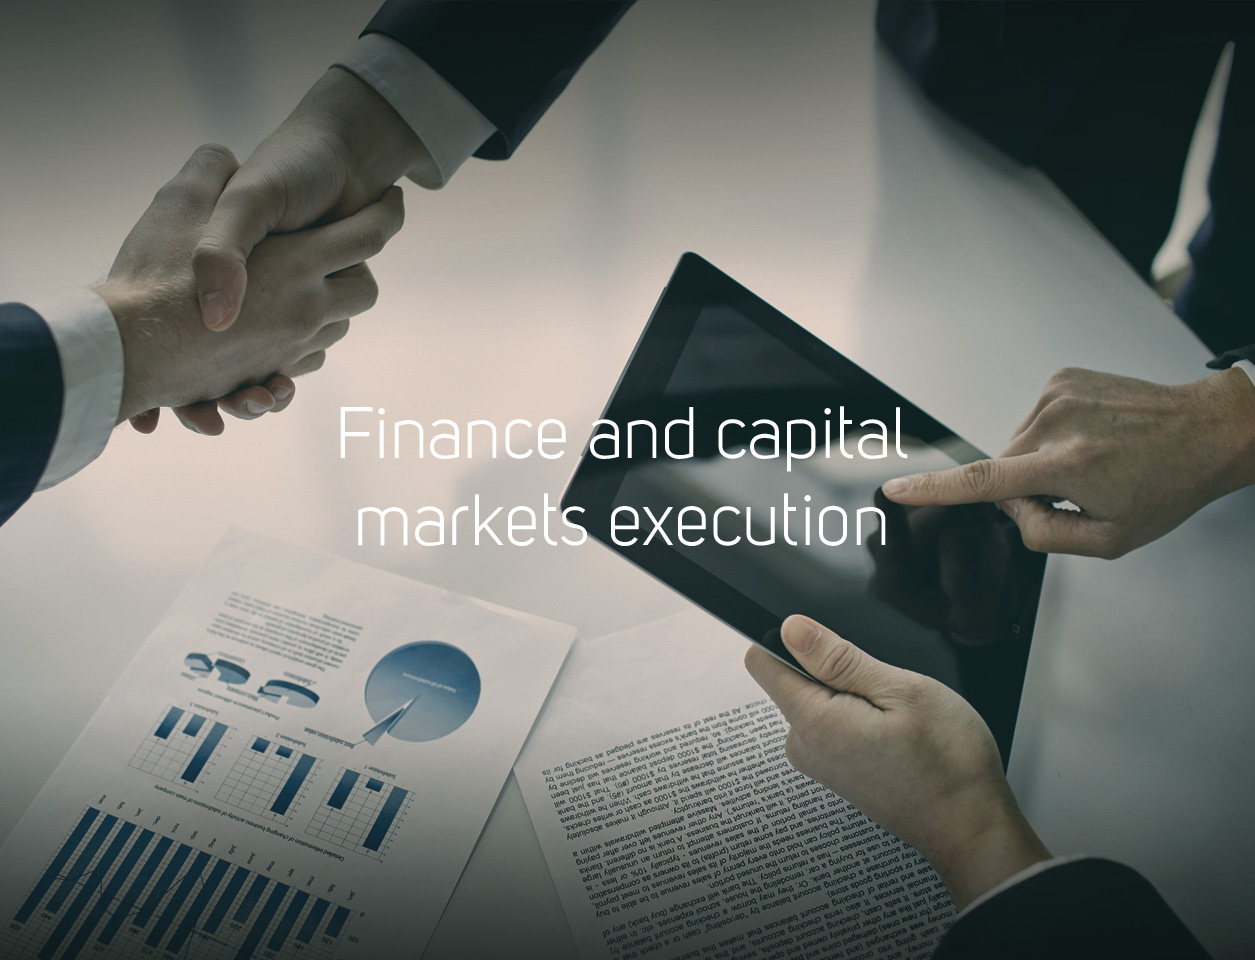 Pampa Corporation Finance and capital markets execution